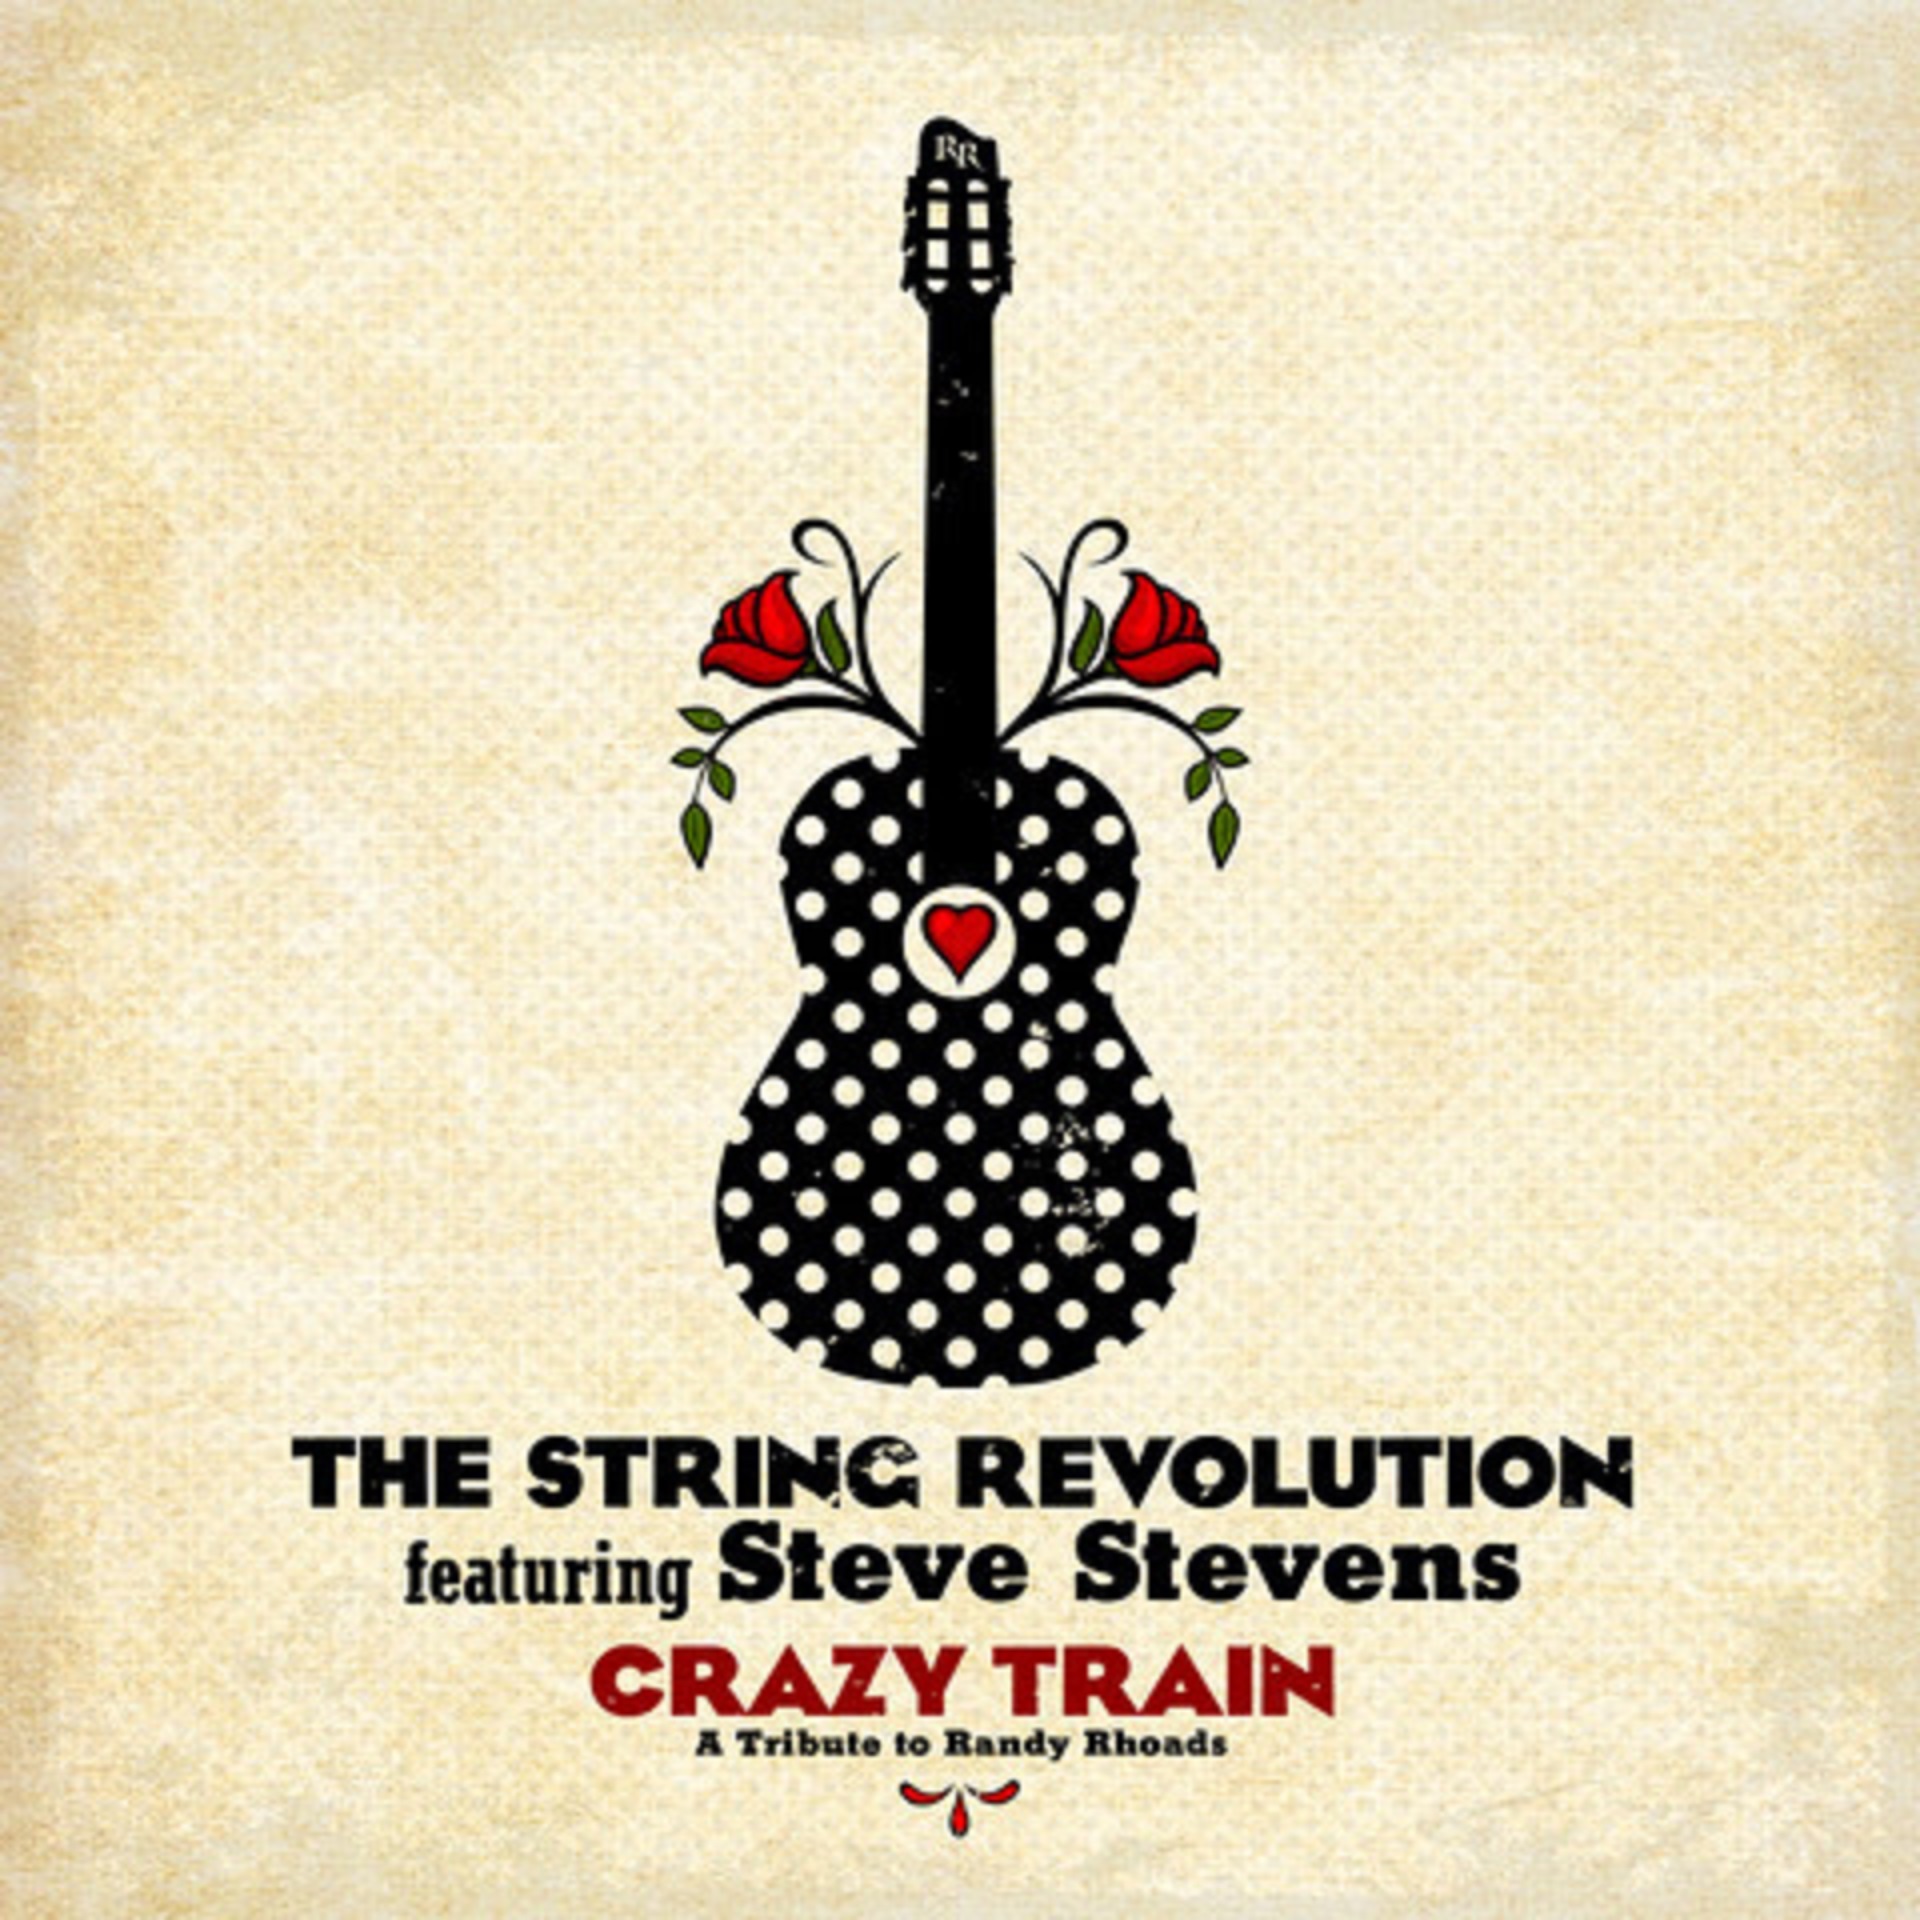 THE STRING REVOLUTION PAYS TRIBUTE TO RANDY RHOADS WITH THE RELEASE OF “CRAZY TRAIN” 